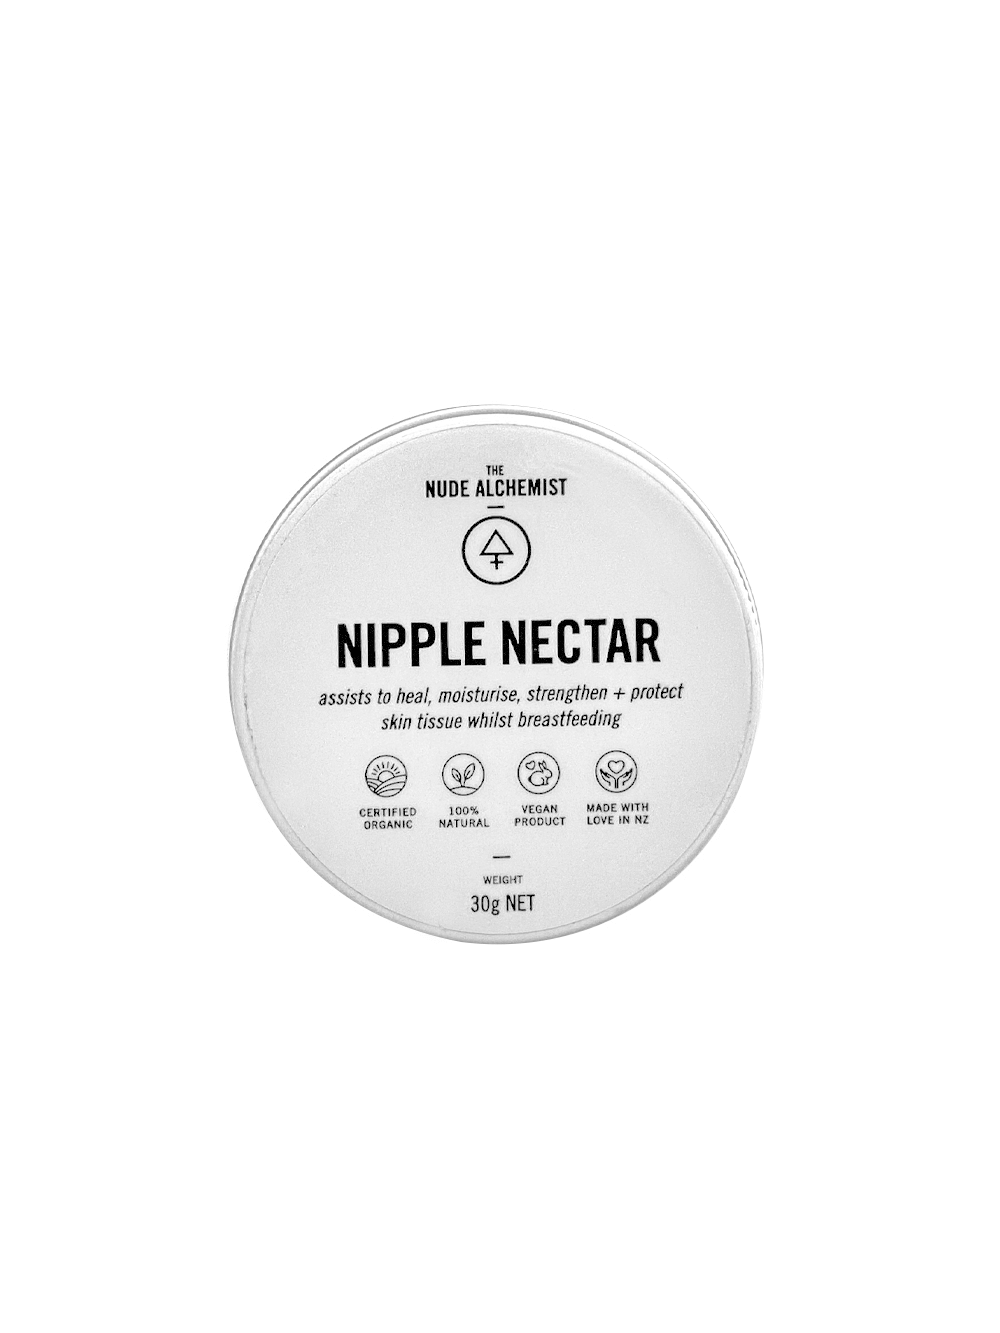 Nipple Nectar for breastfeeding mothers by The Nude Alchemist